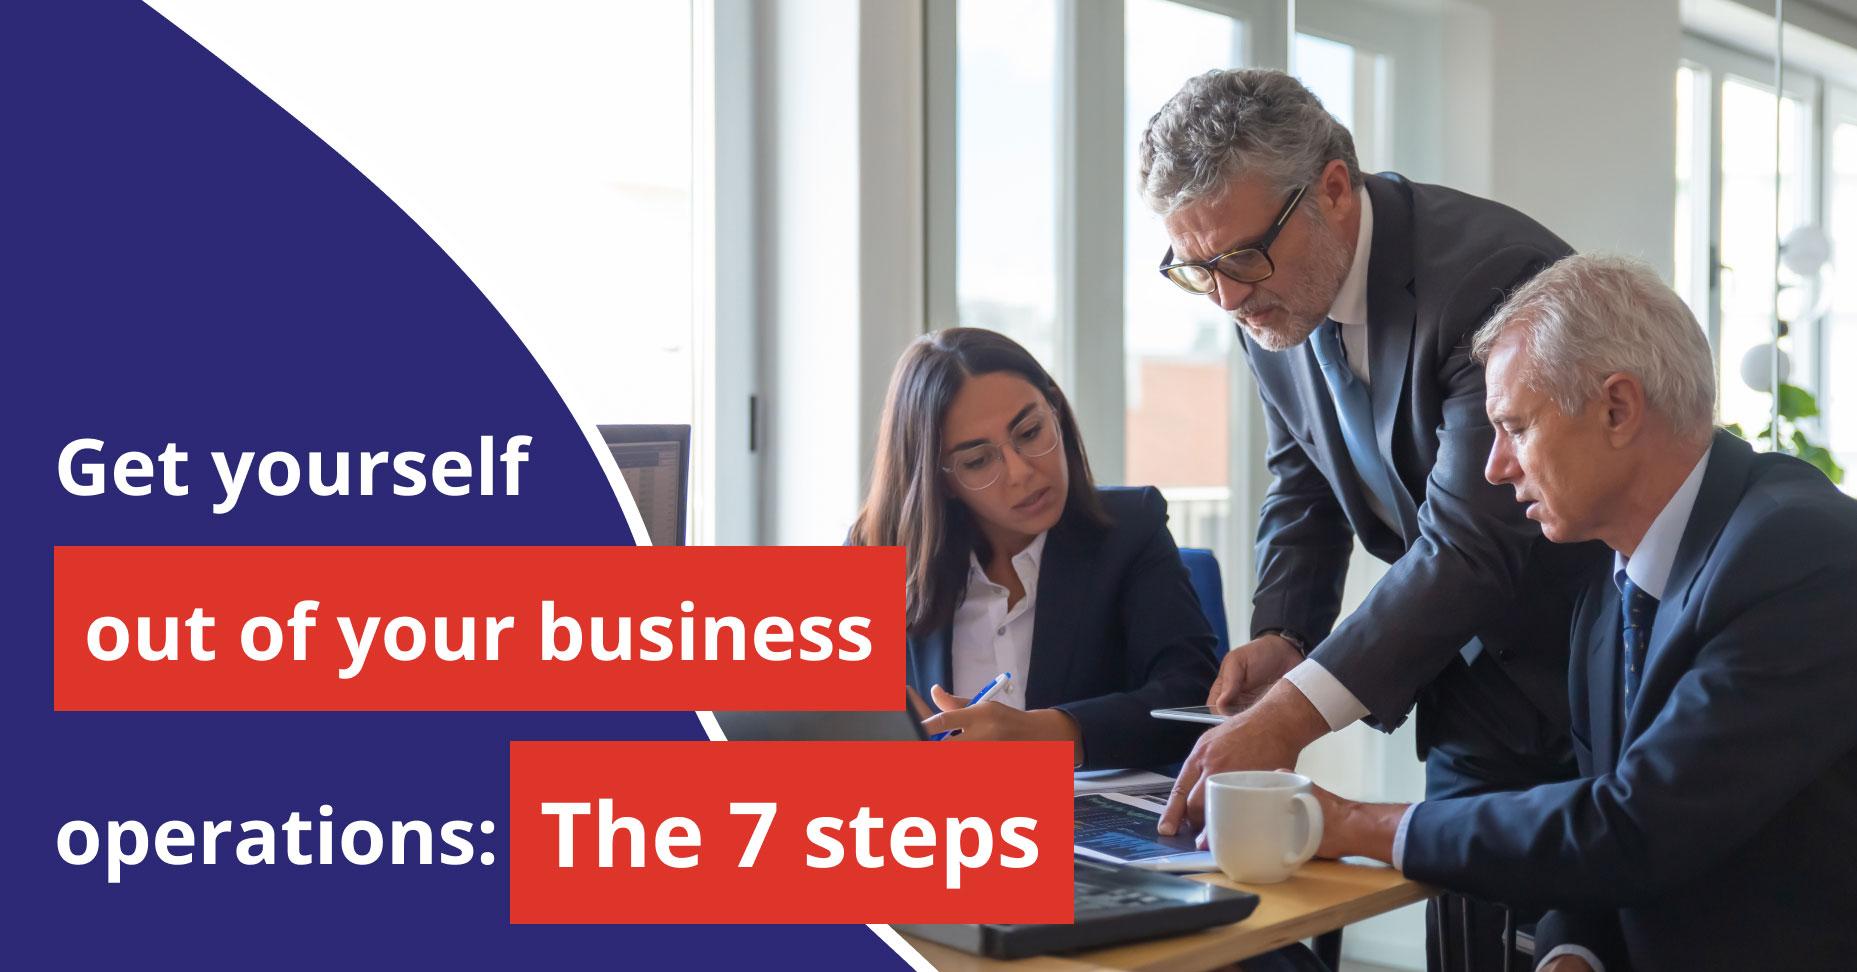 Get yourself out of your business' operations: The 7 steps